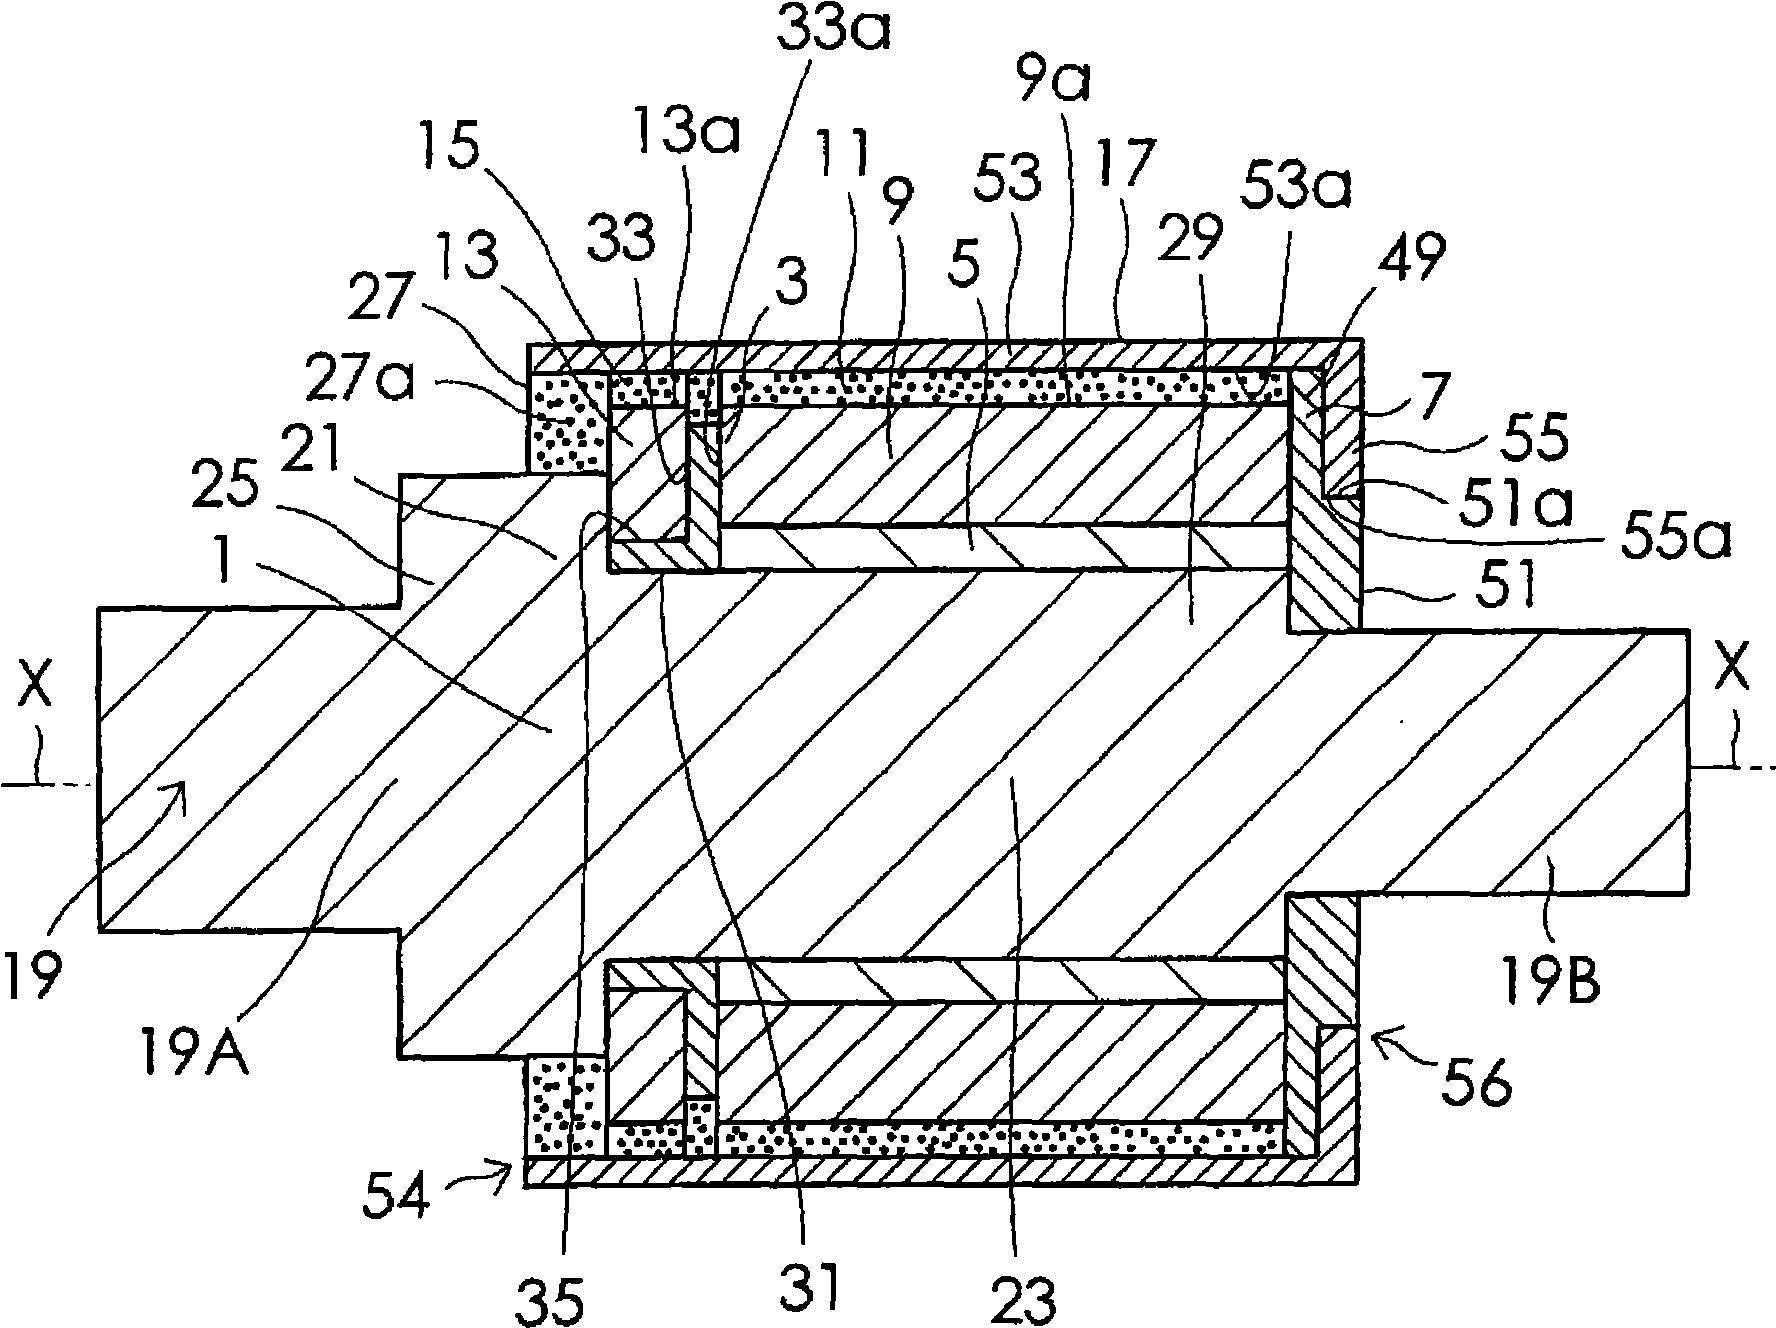 Rotator for motor and method for manufacturing the same